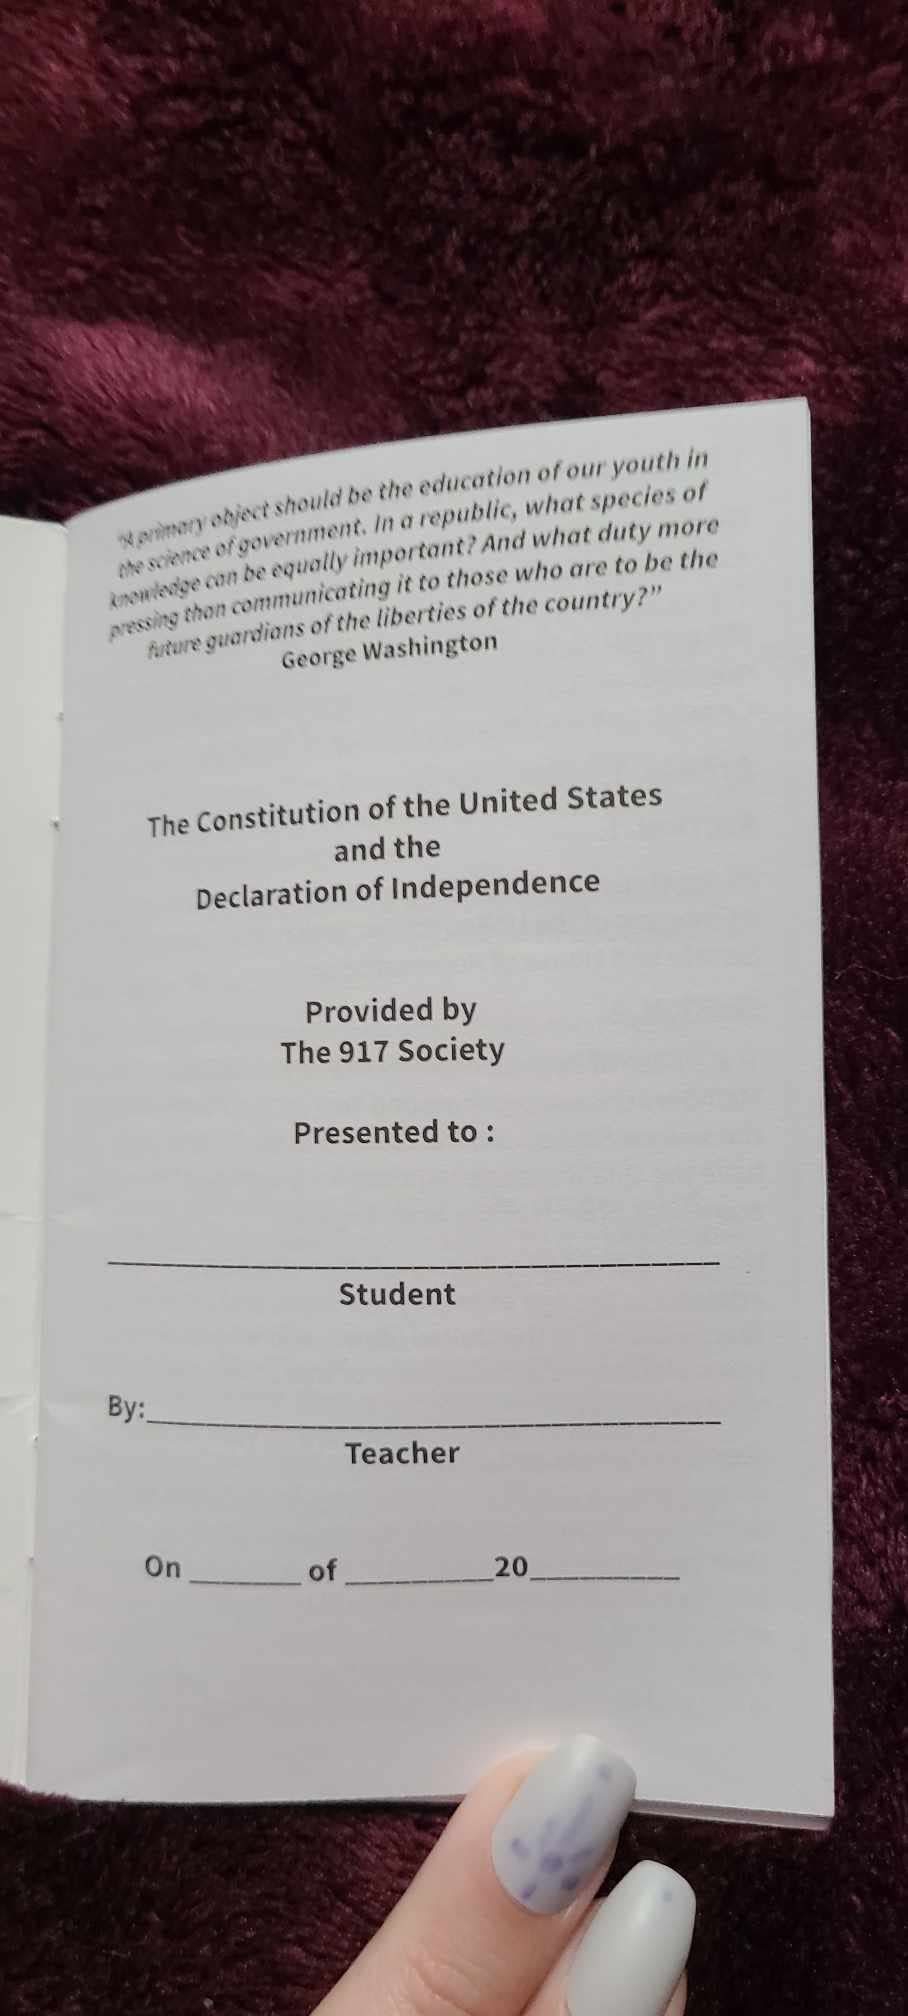 A pocket Constitution from the 917 Society that was delivered to a Brevard middle school.